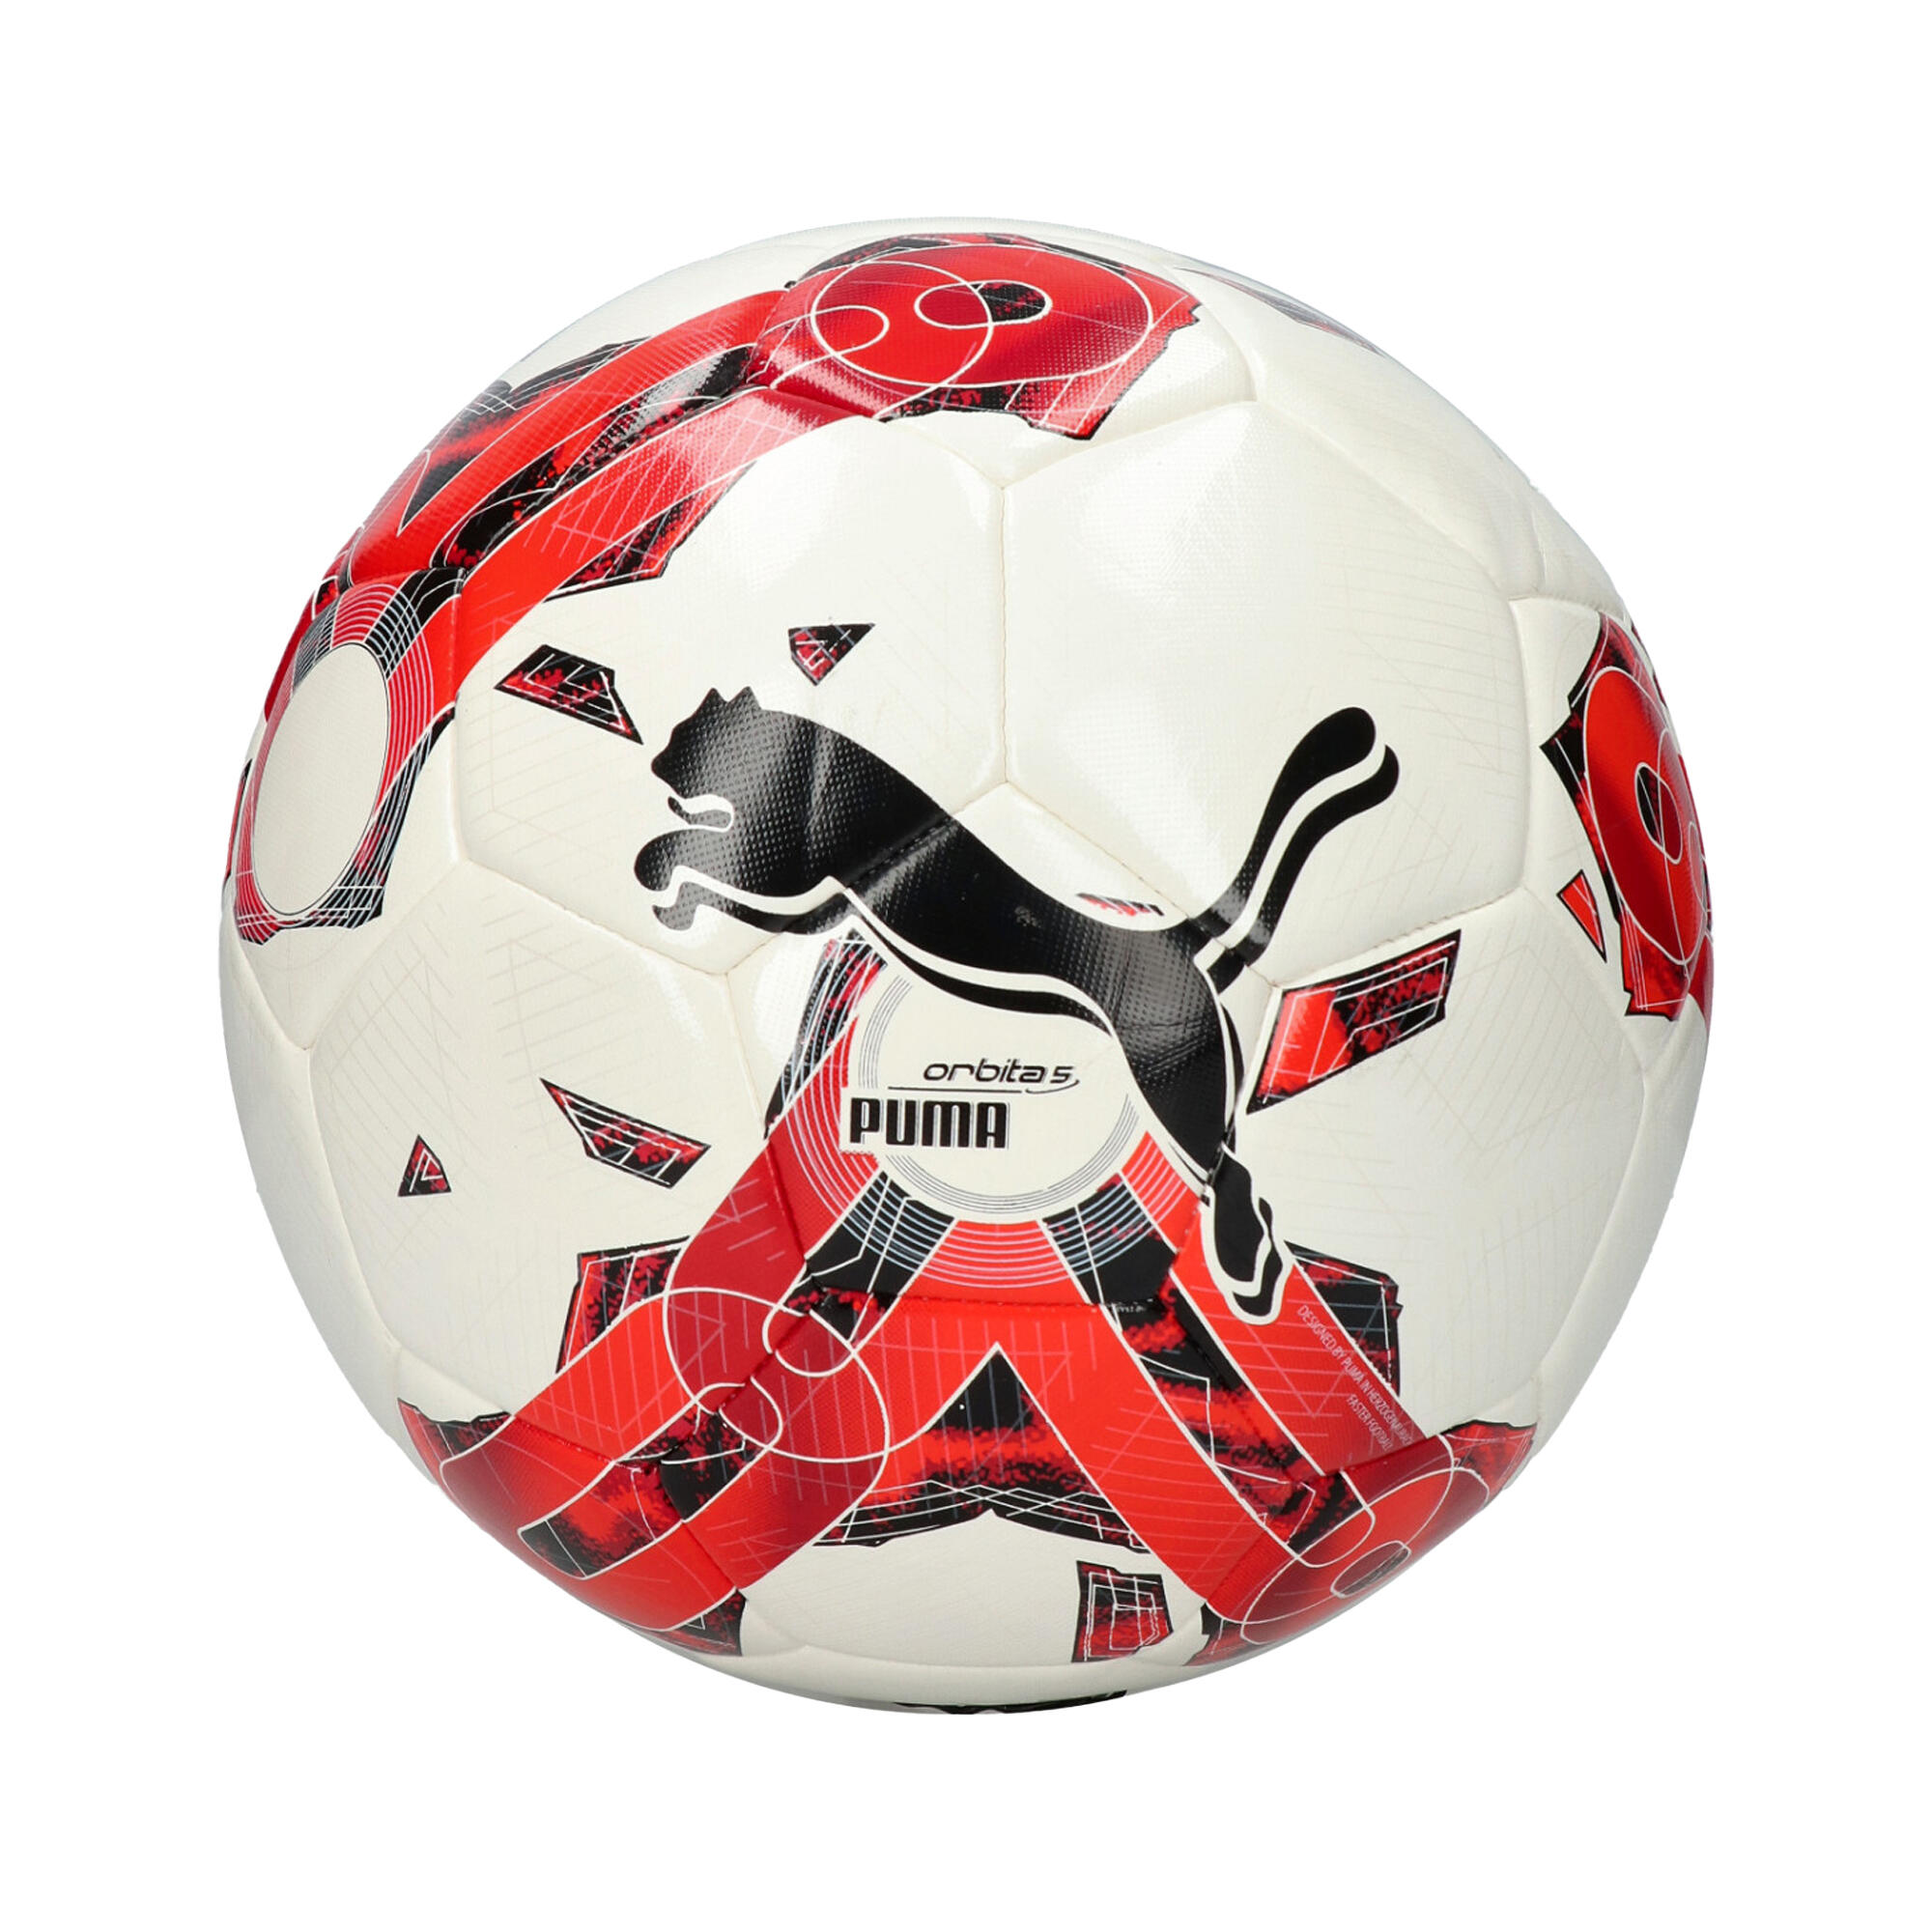 TeamFINAL6 MS Training Football (White/Red) 1/3